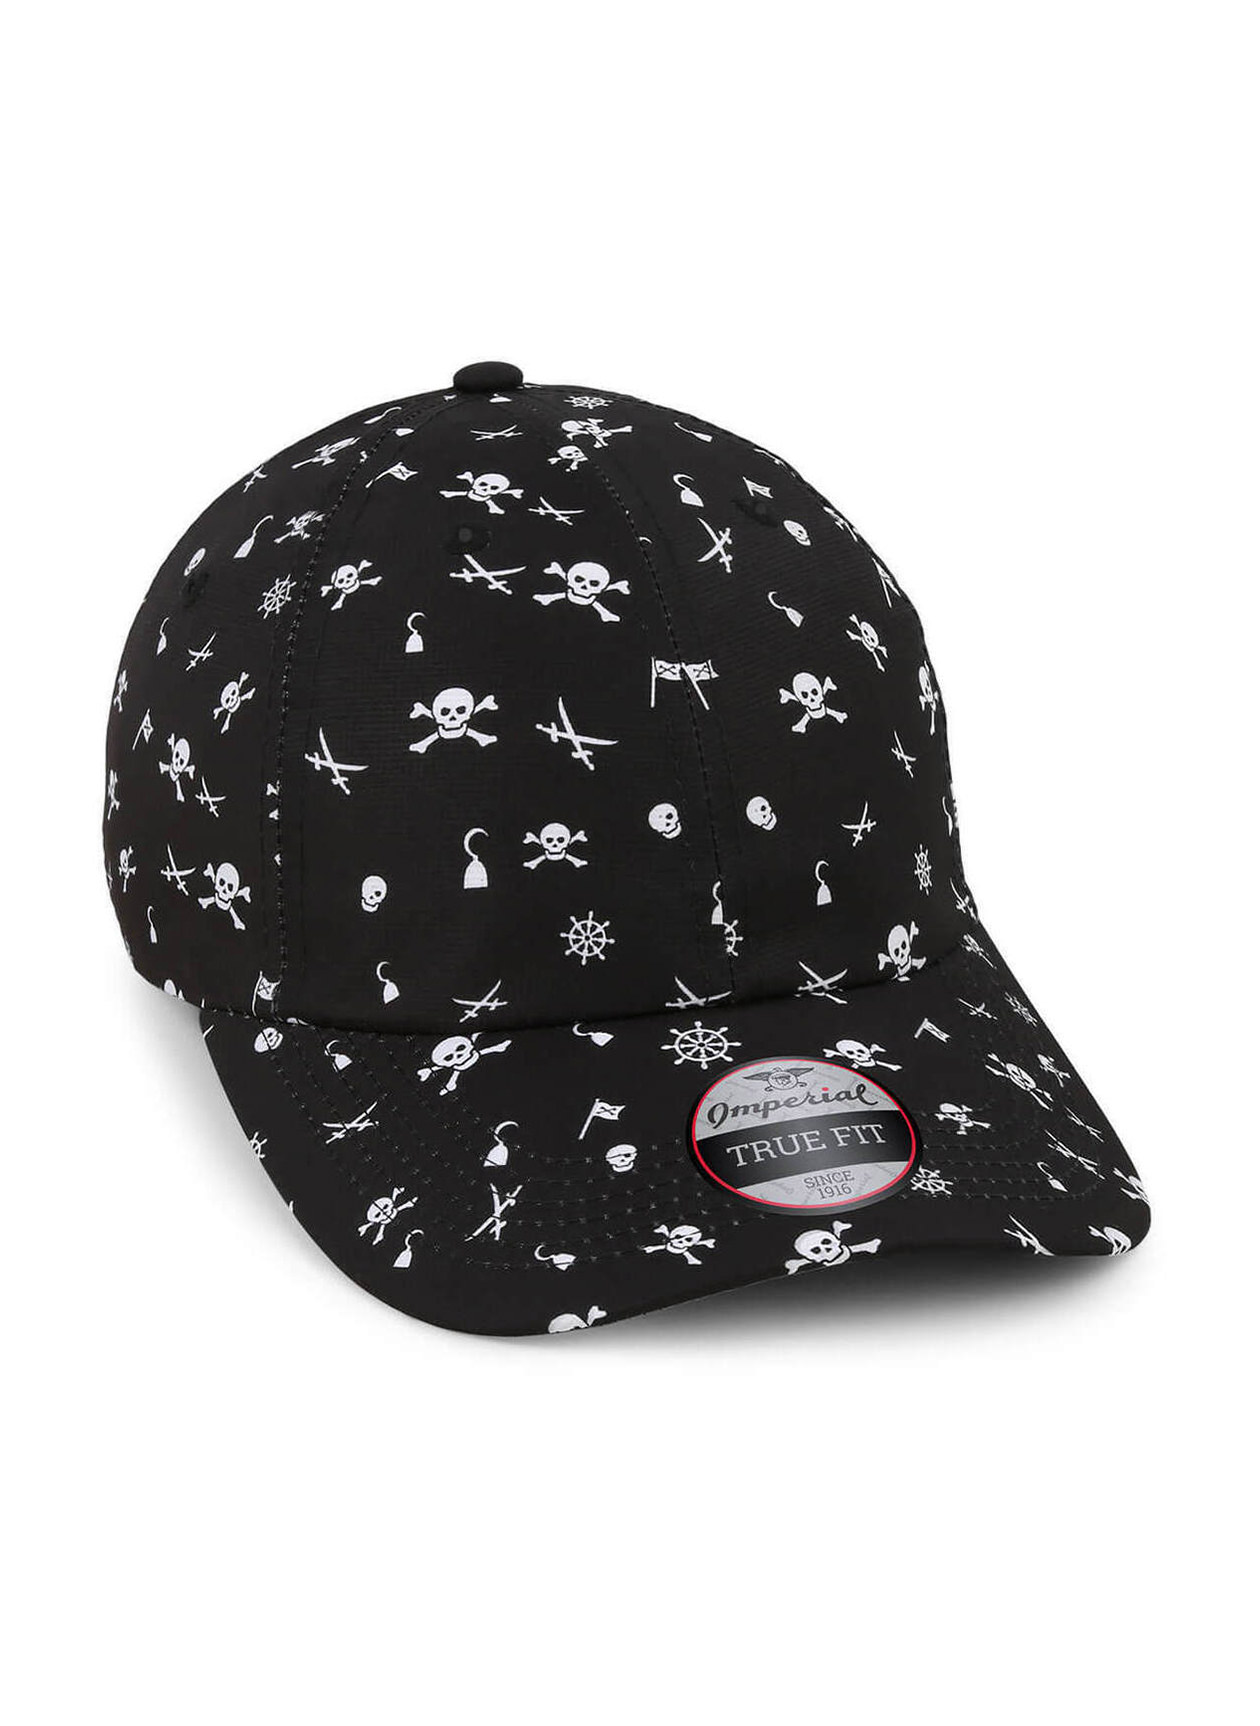 Imperial Black / Pirates The Alter Ego Pattered Performance Hat